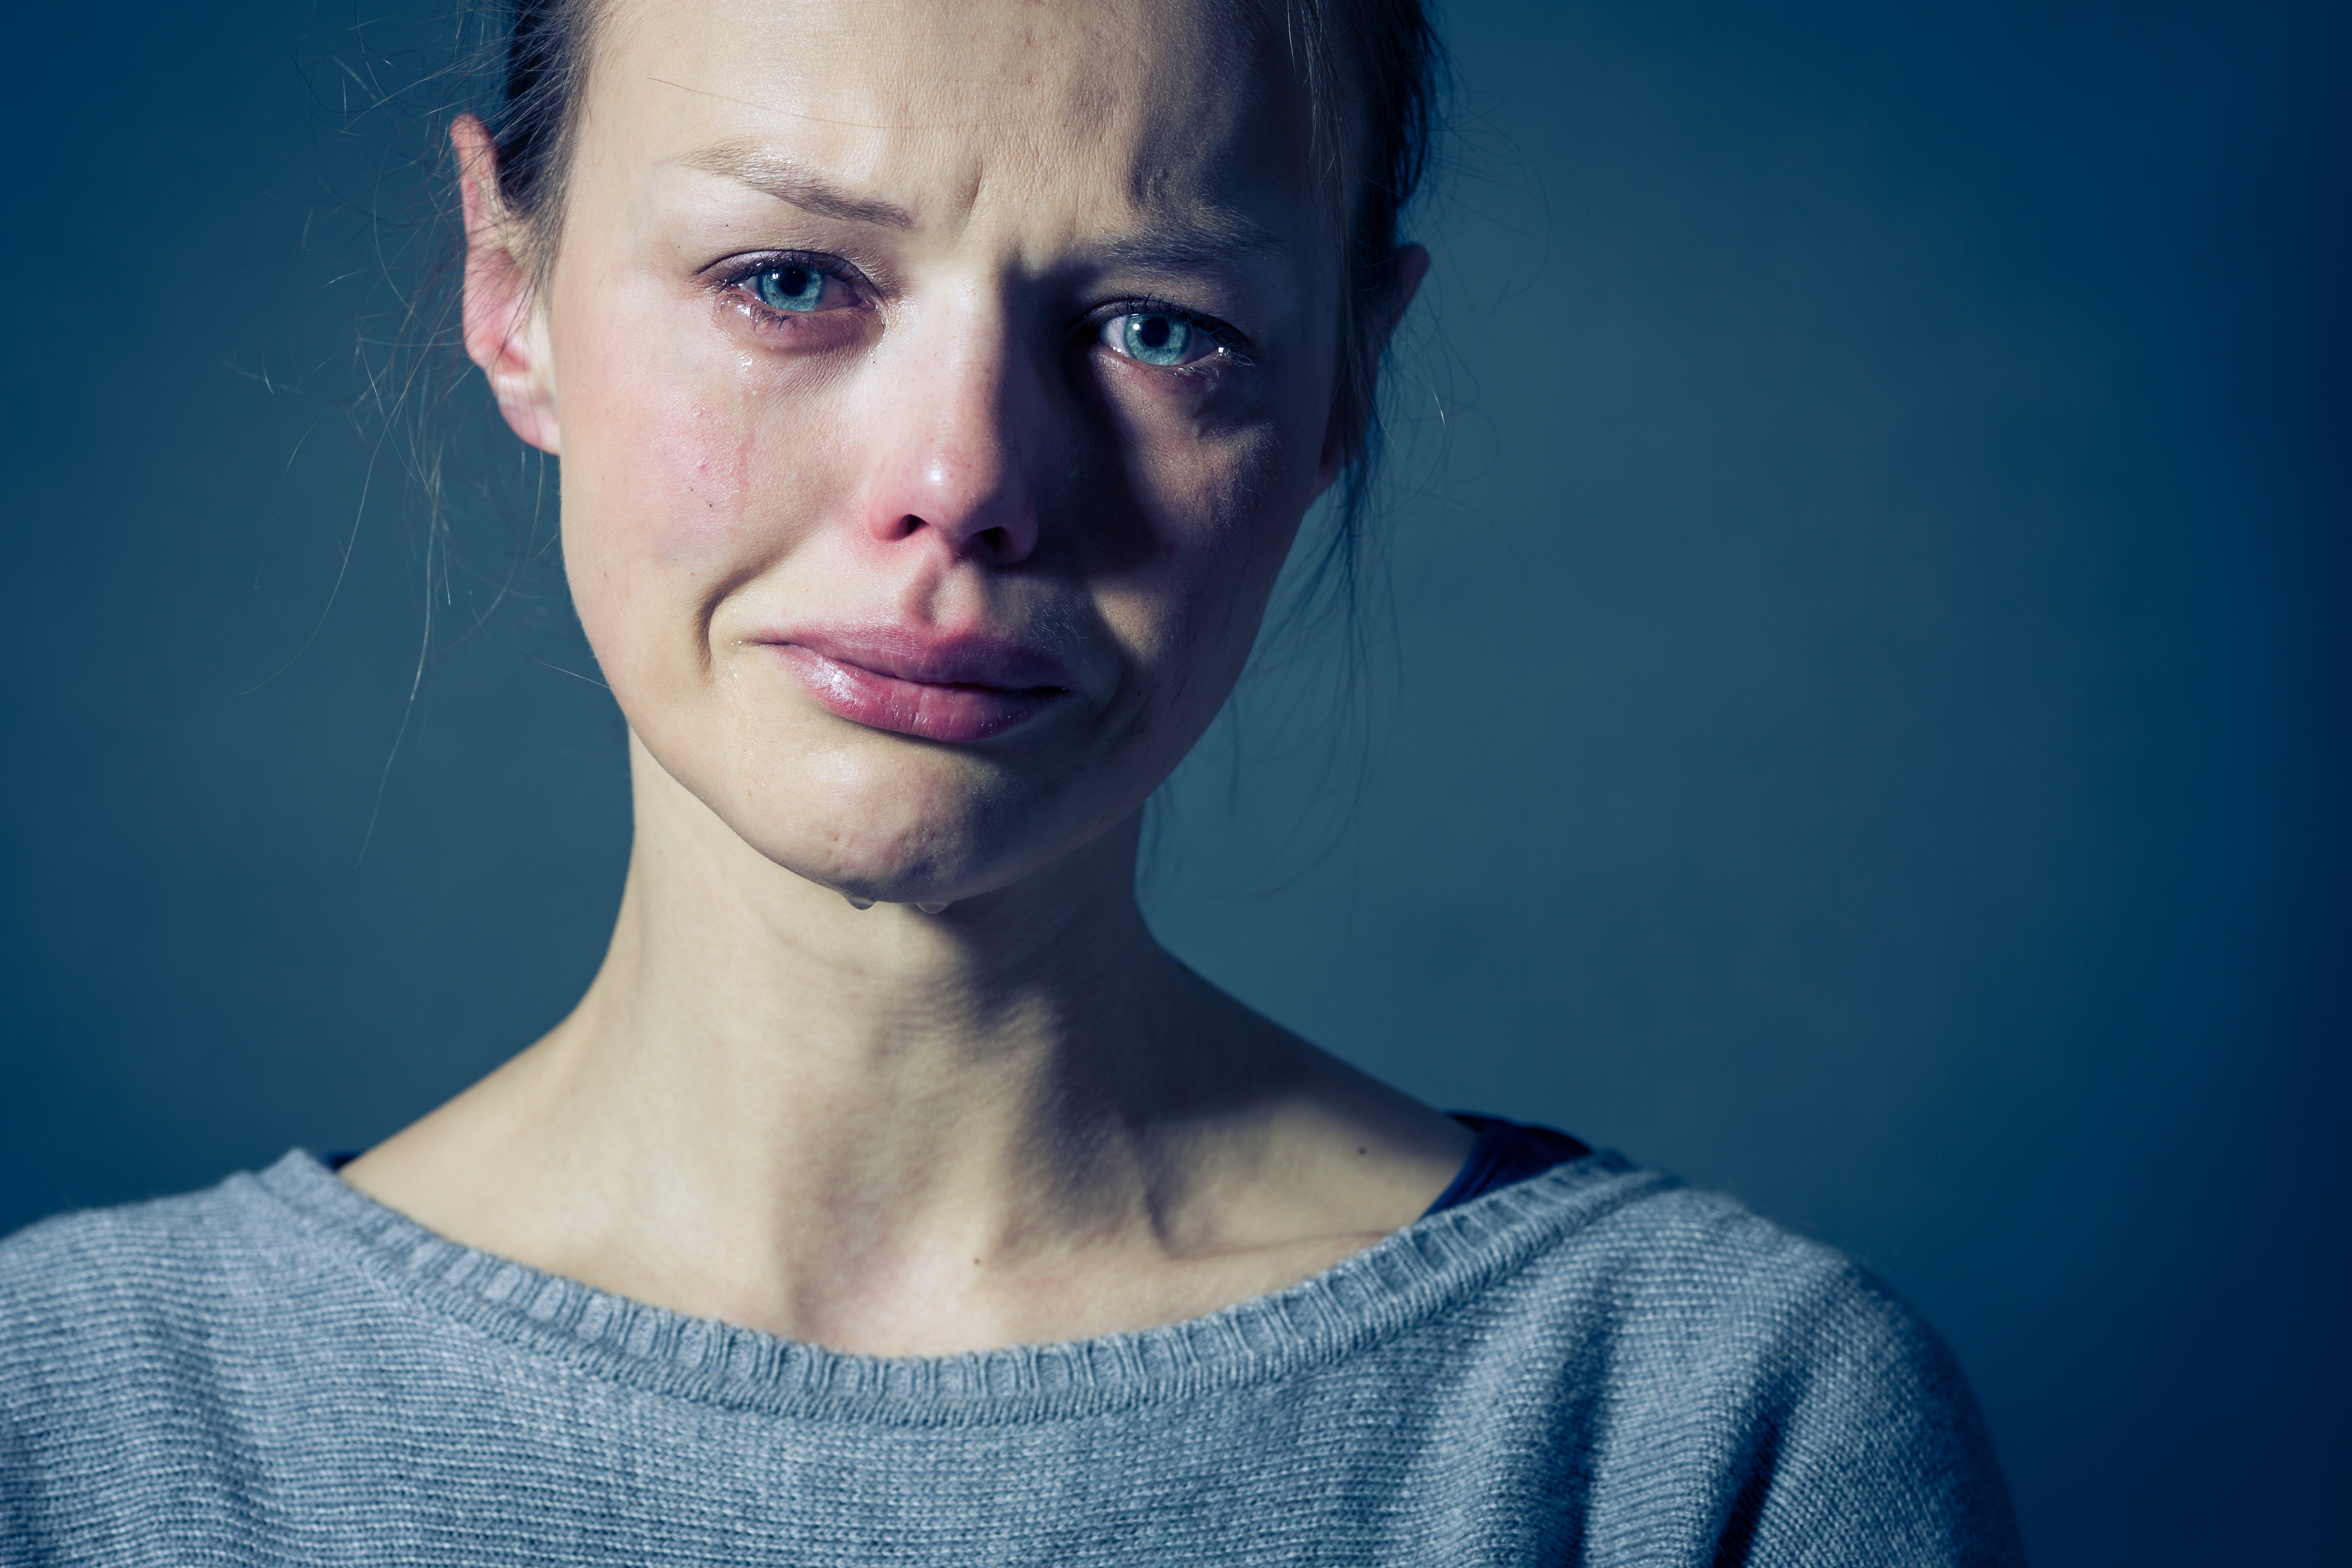 A woman crying | Source: Shutterstock